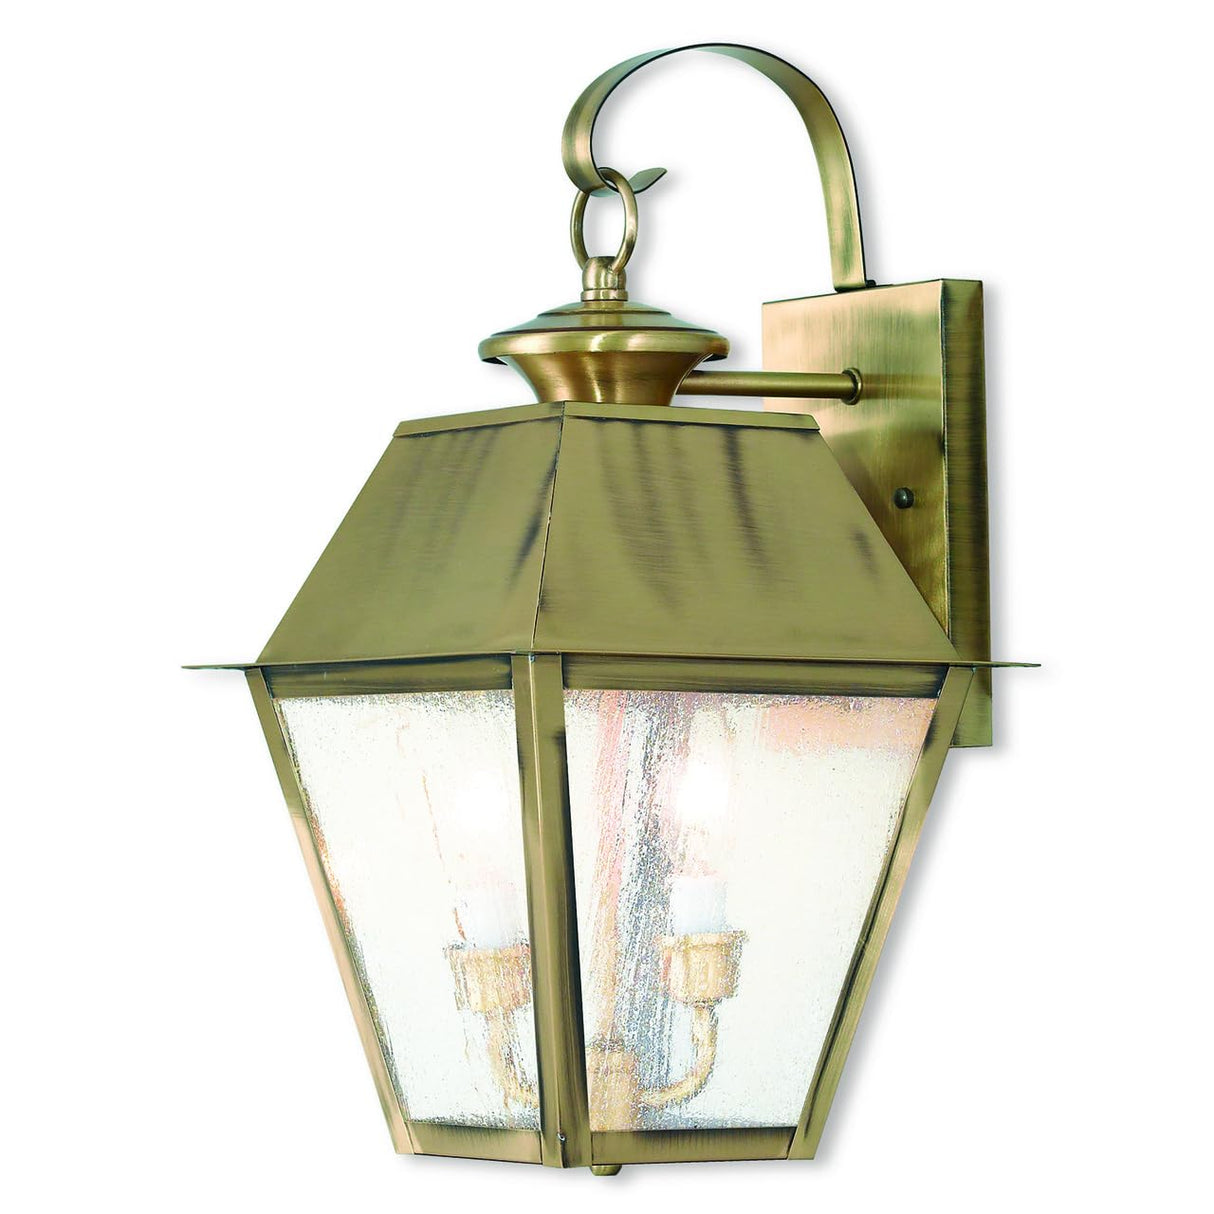 Livex Lighting 2165-01 Transitional Two Light Outdoor Wall Lantern from Mansfield Collection Finish, Antique Brass